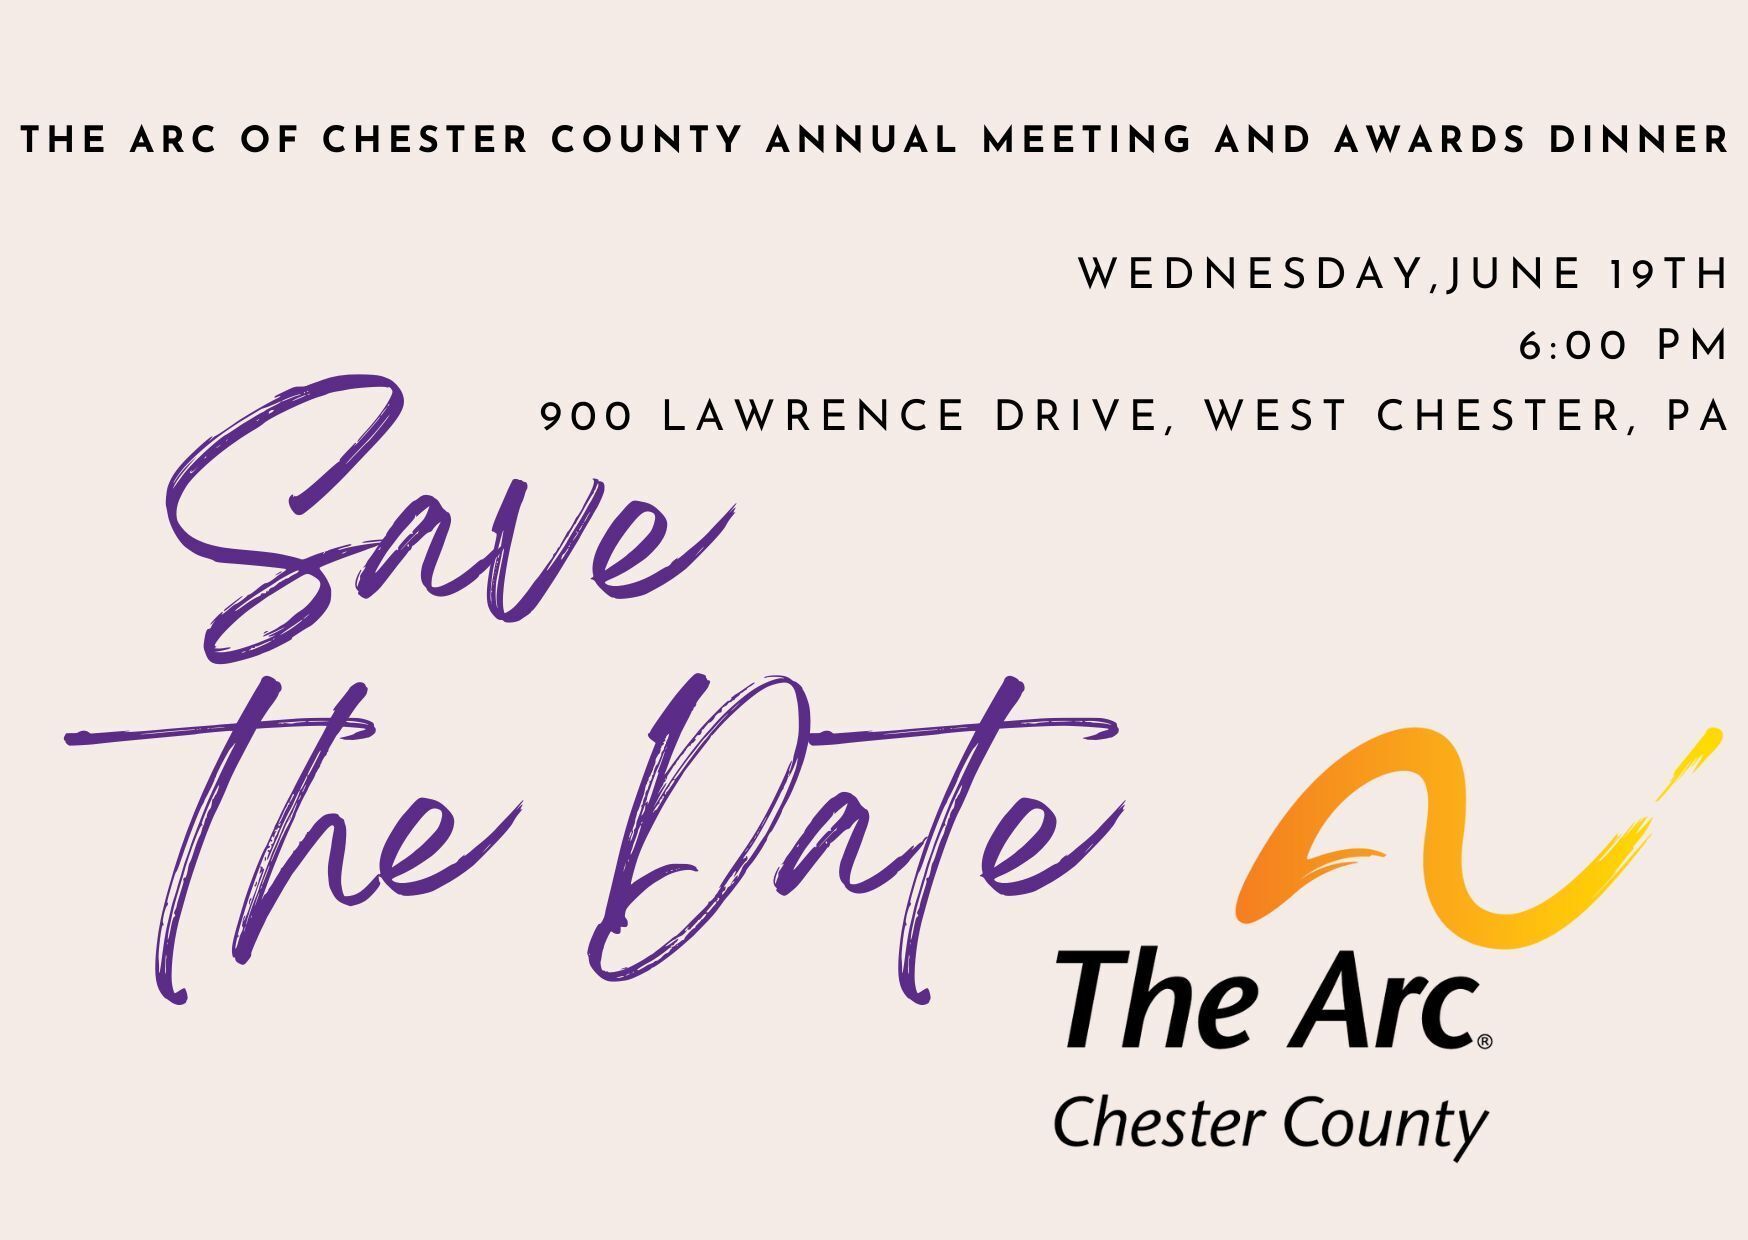 Save The Date Annual Meeting and Awards Dinner